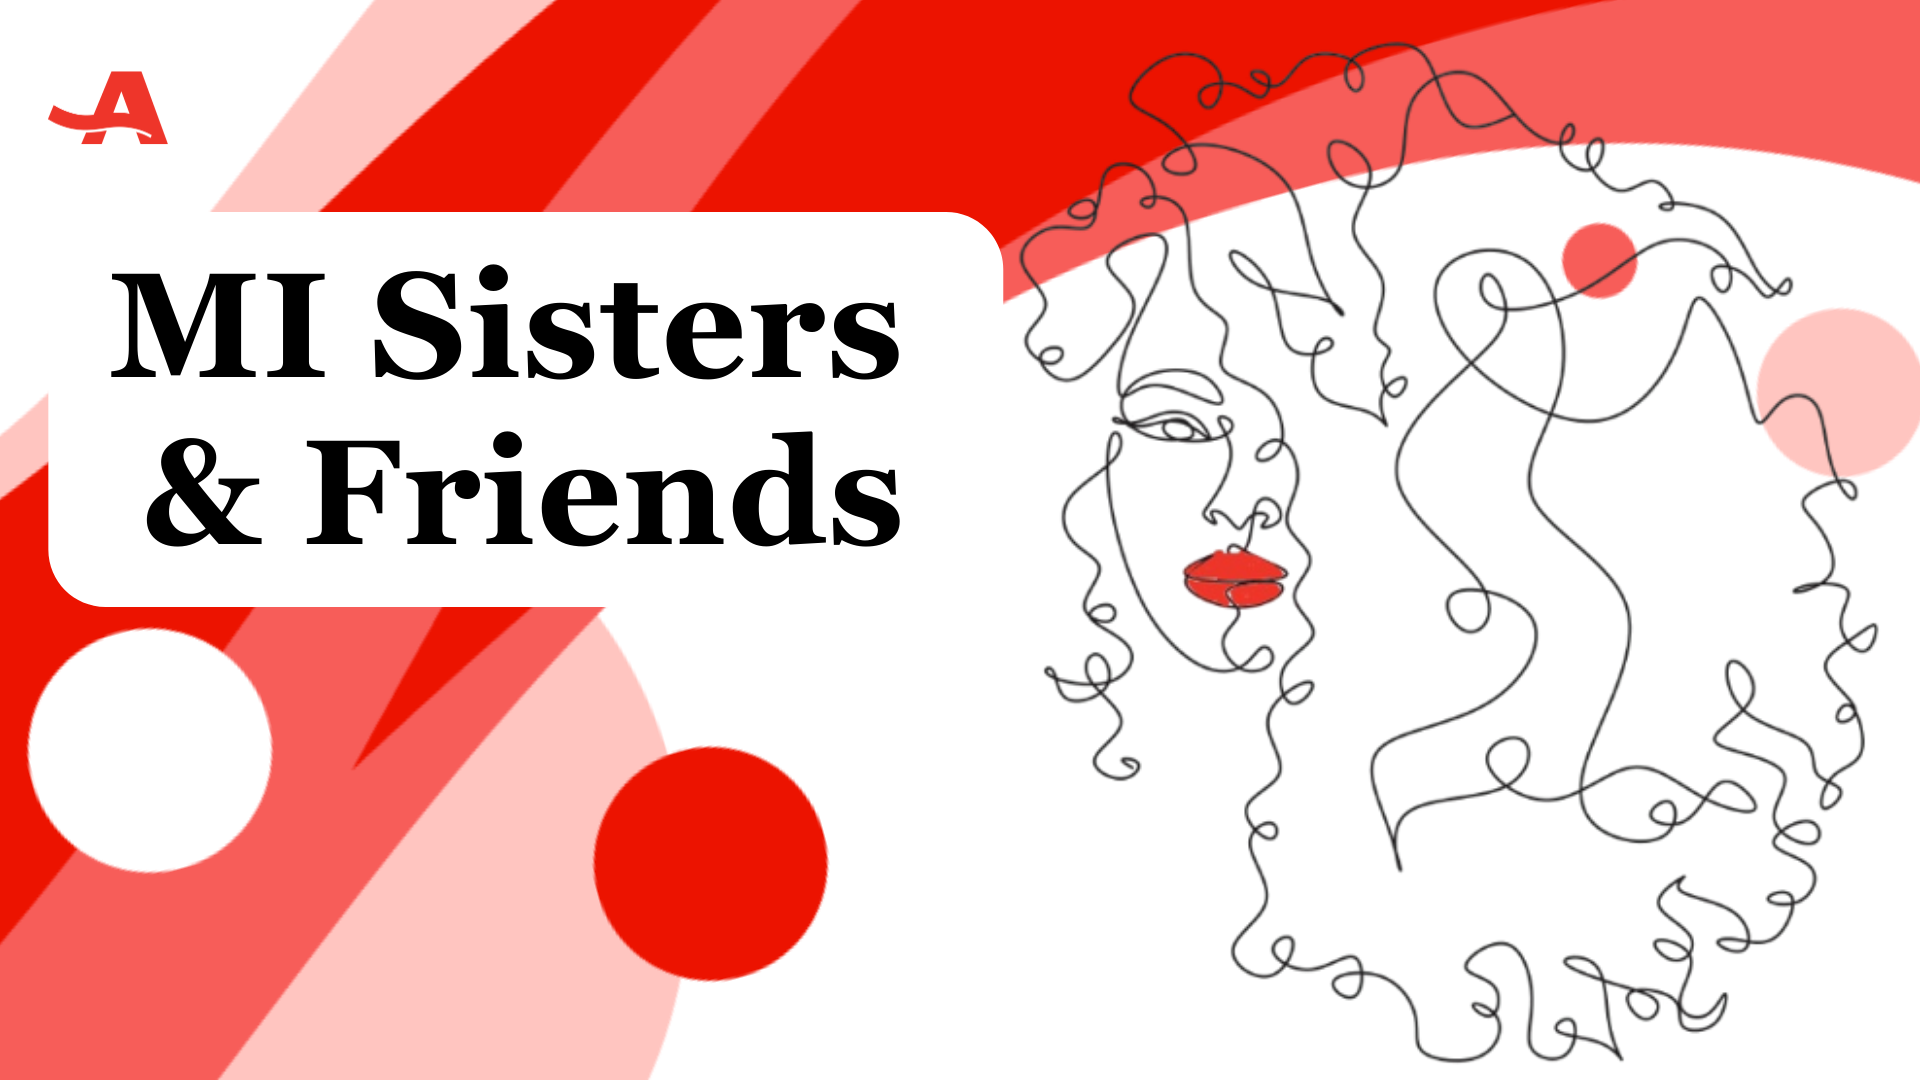 MI Sisters and Friends Image.png